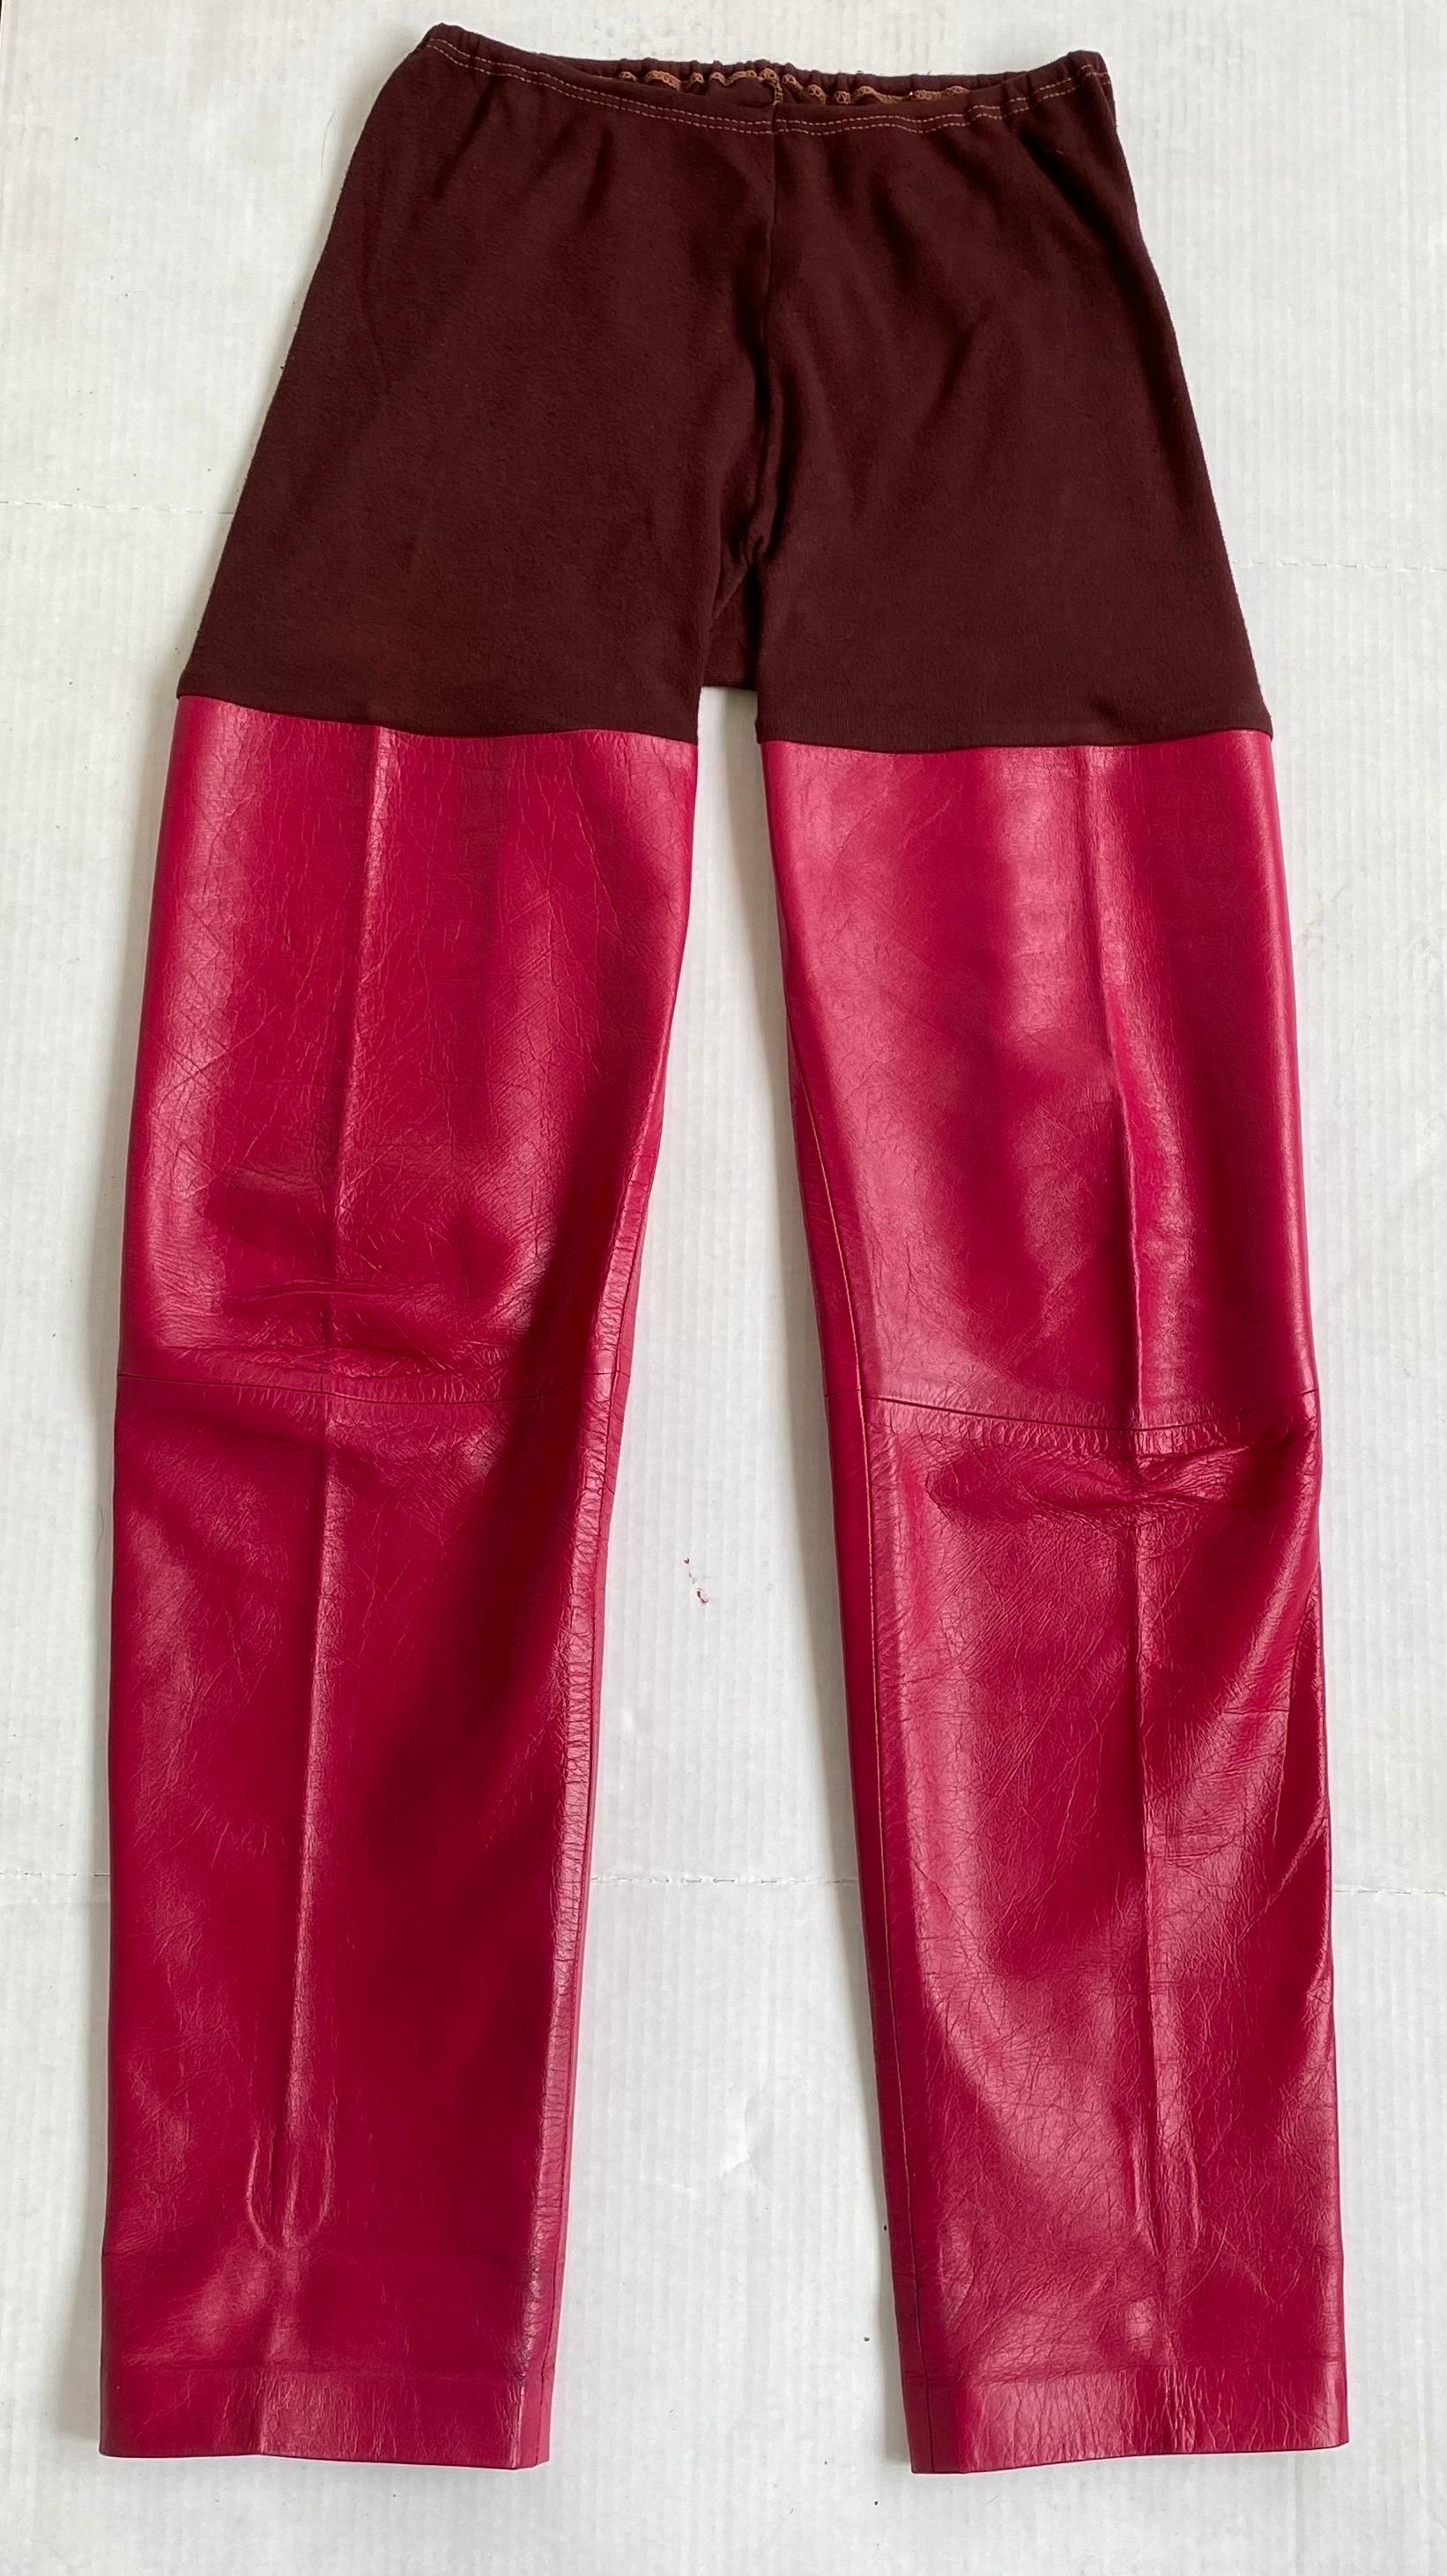 Leather and cotton pants / leggings from the 1995 runway show 
Gently worn in very good condition 
Elastic waist 
Size 42
Waist measures 24” un stretched and will stretch to 32” hips 42”  inseam 32 length 42 